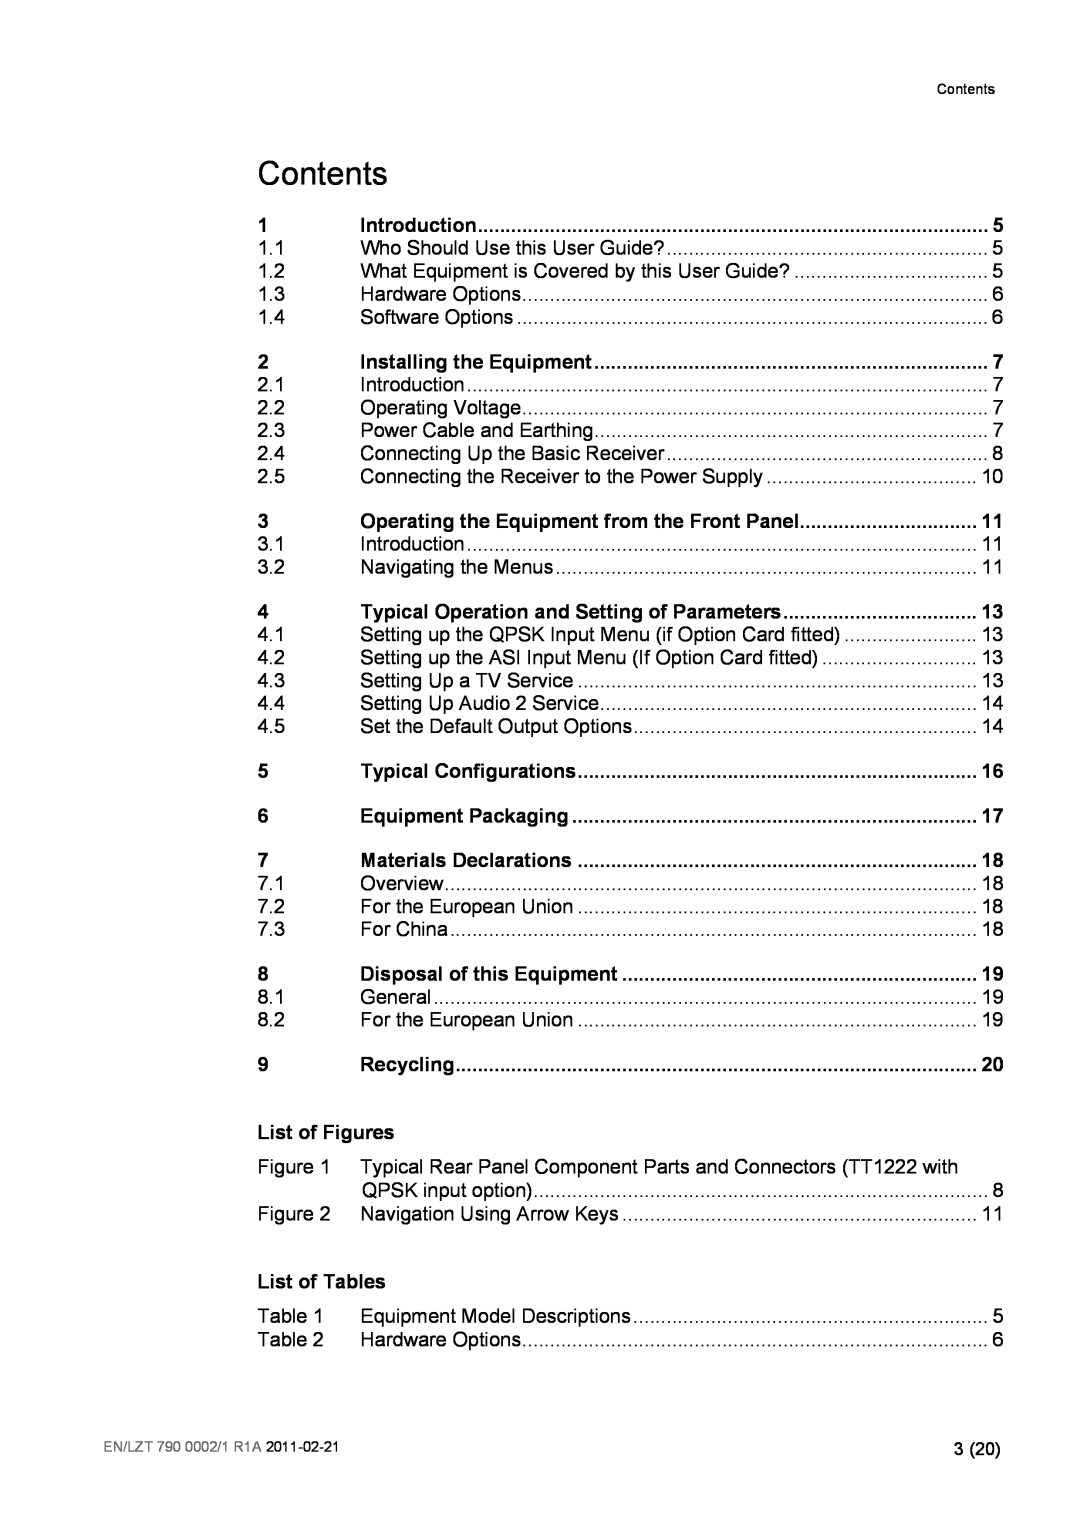 Ericsson TT1222 manual Contents, List of Figures, List of Tables 